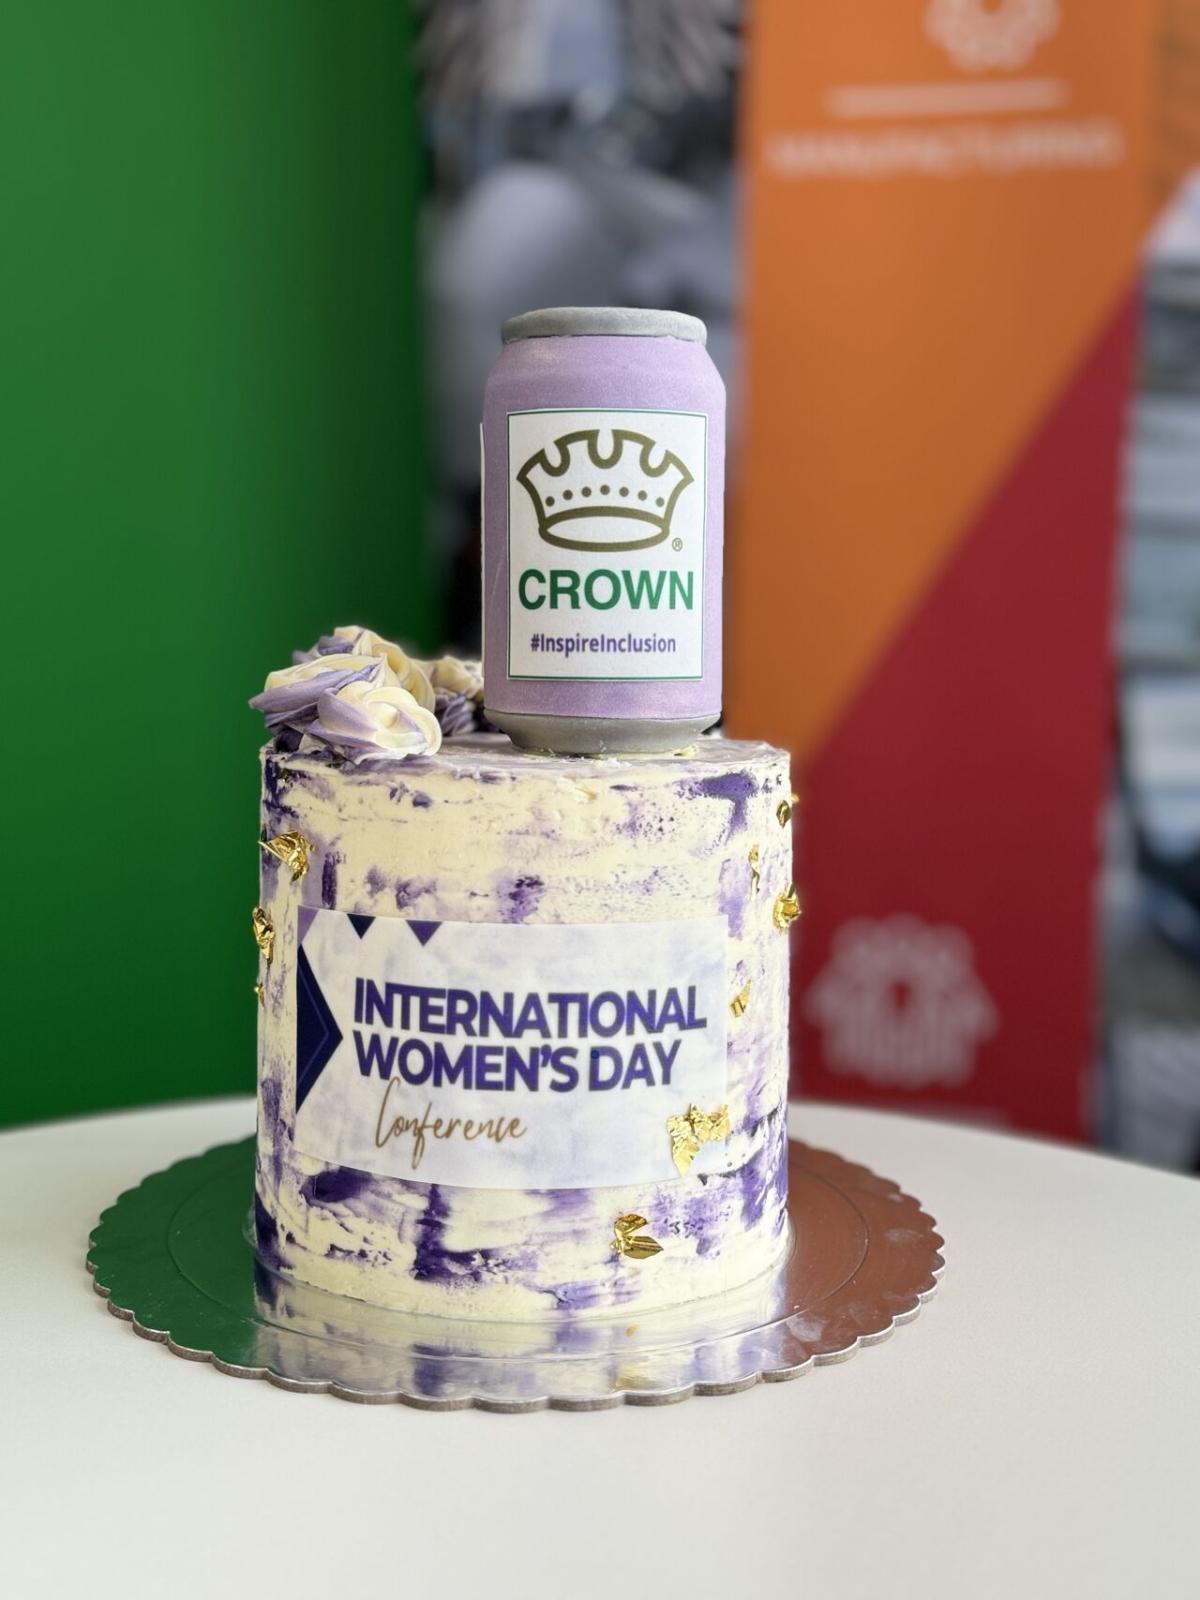 A white and purple cake that has "international women's day conference" on the front 